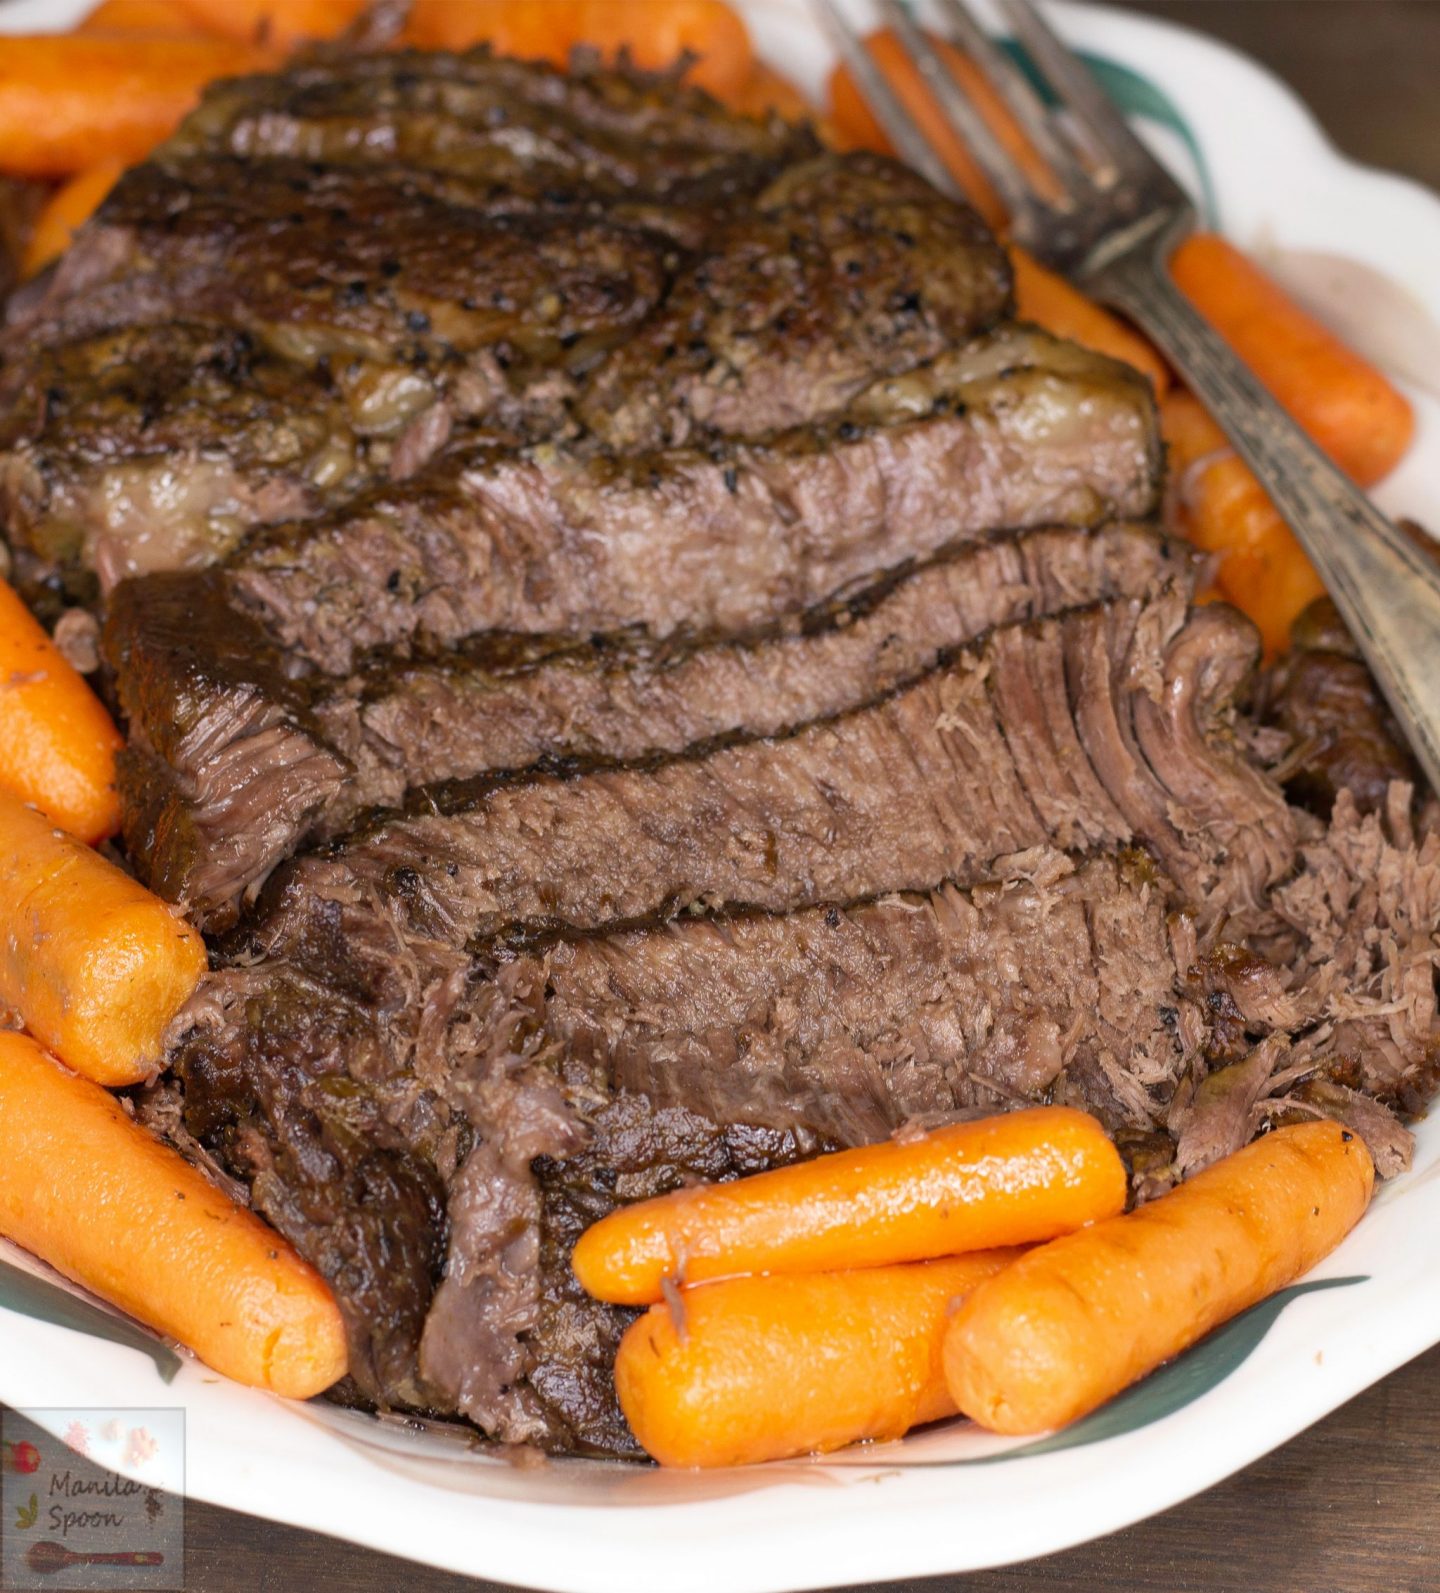 Melt-in-your-mouth delicious Instant Pot Dilled Pot Roast! I don't make any other pot roast as this is for us the best pot roast ever! The dilled sour cream gravy brings this over the top and only a few ingredients are needed to make this. A sure winner! #potroast #roastbeef #dilledpotroast #instantpot #dinner